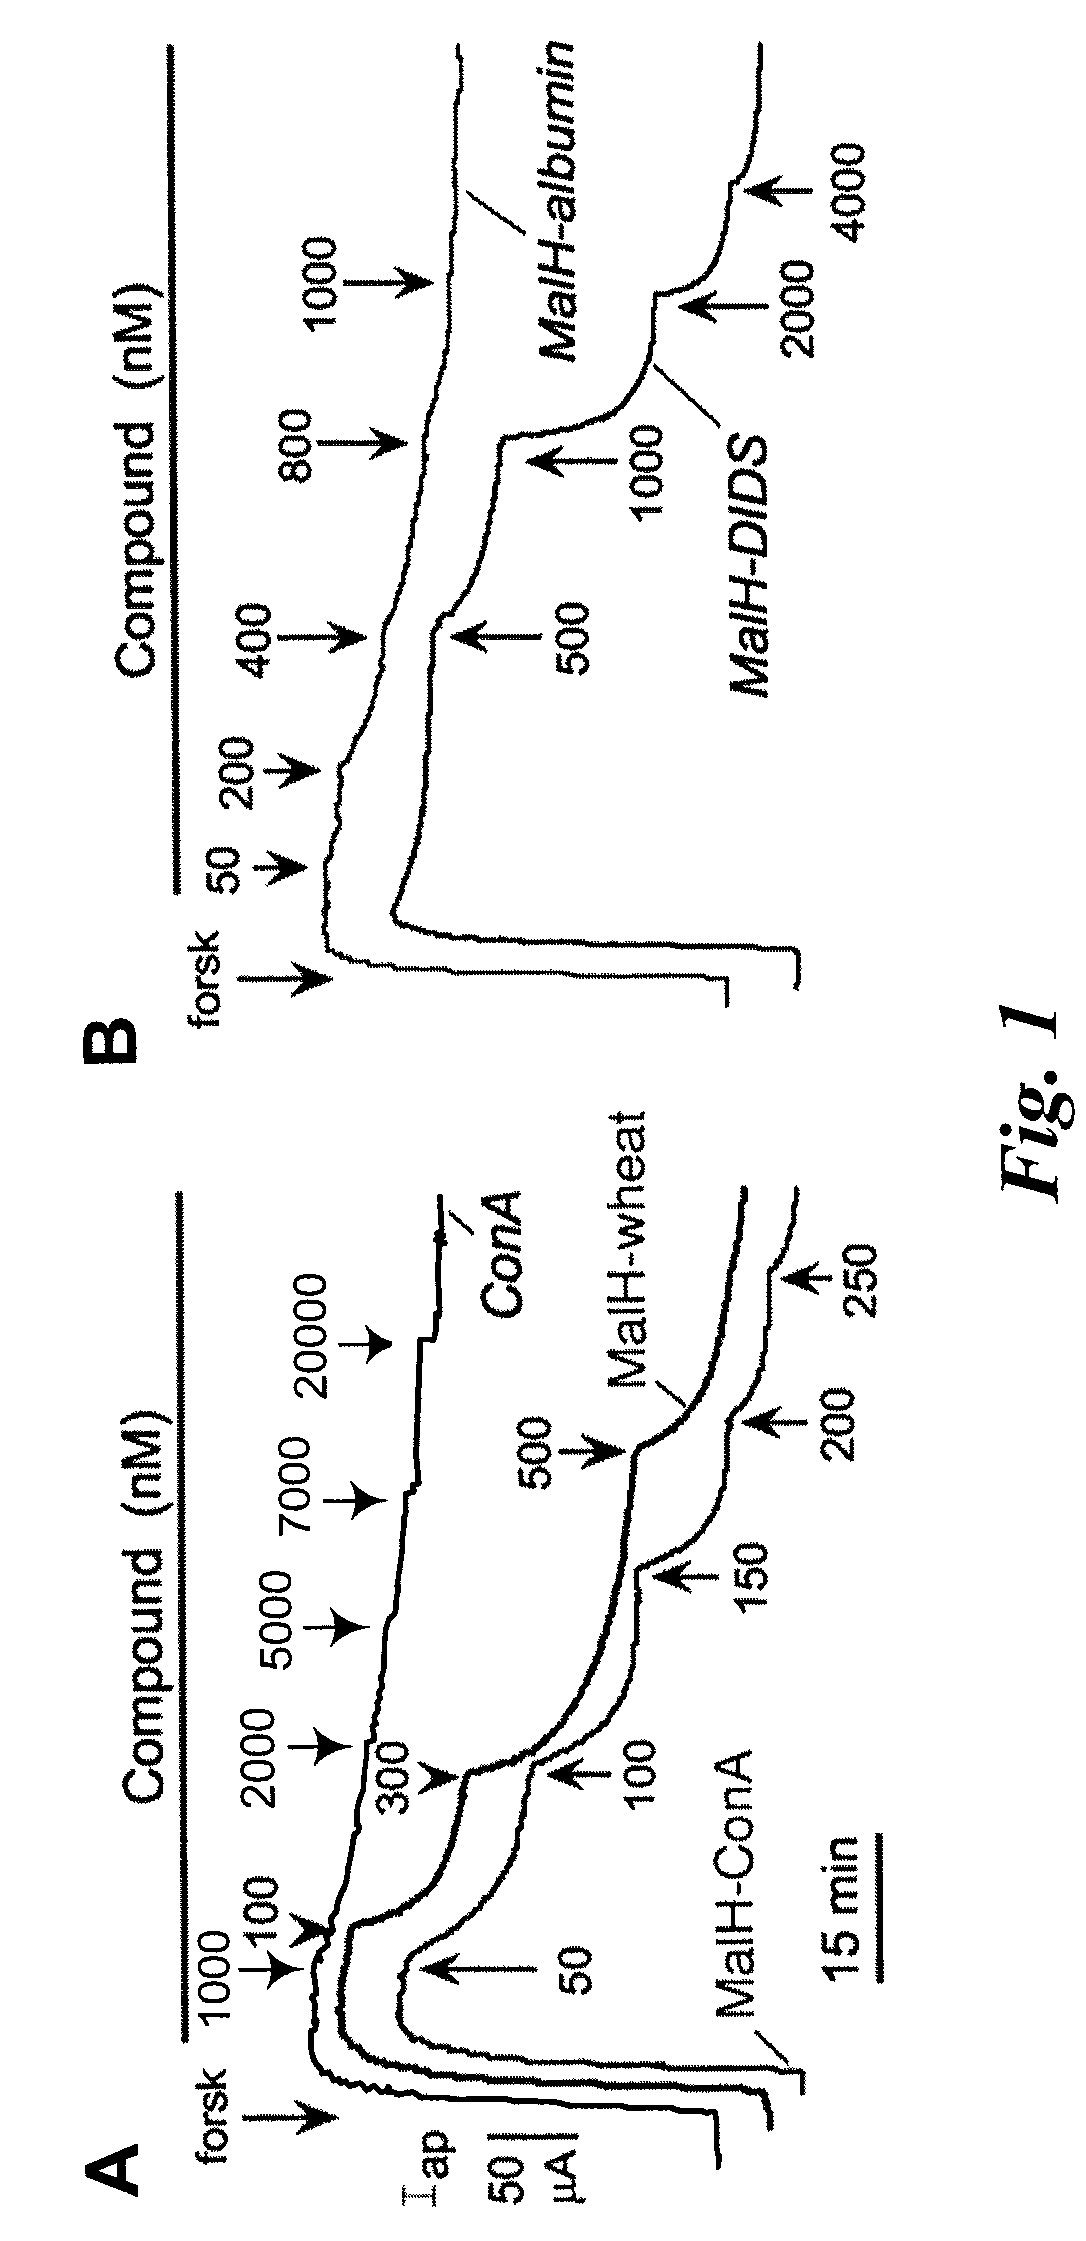 Macromolecular conjugates of cystic fibrosis transmembrane conductance regulator protein inhibitors and uses therefor